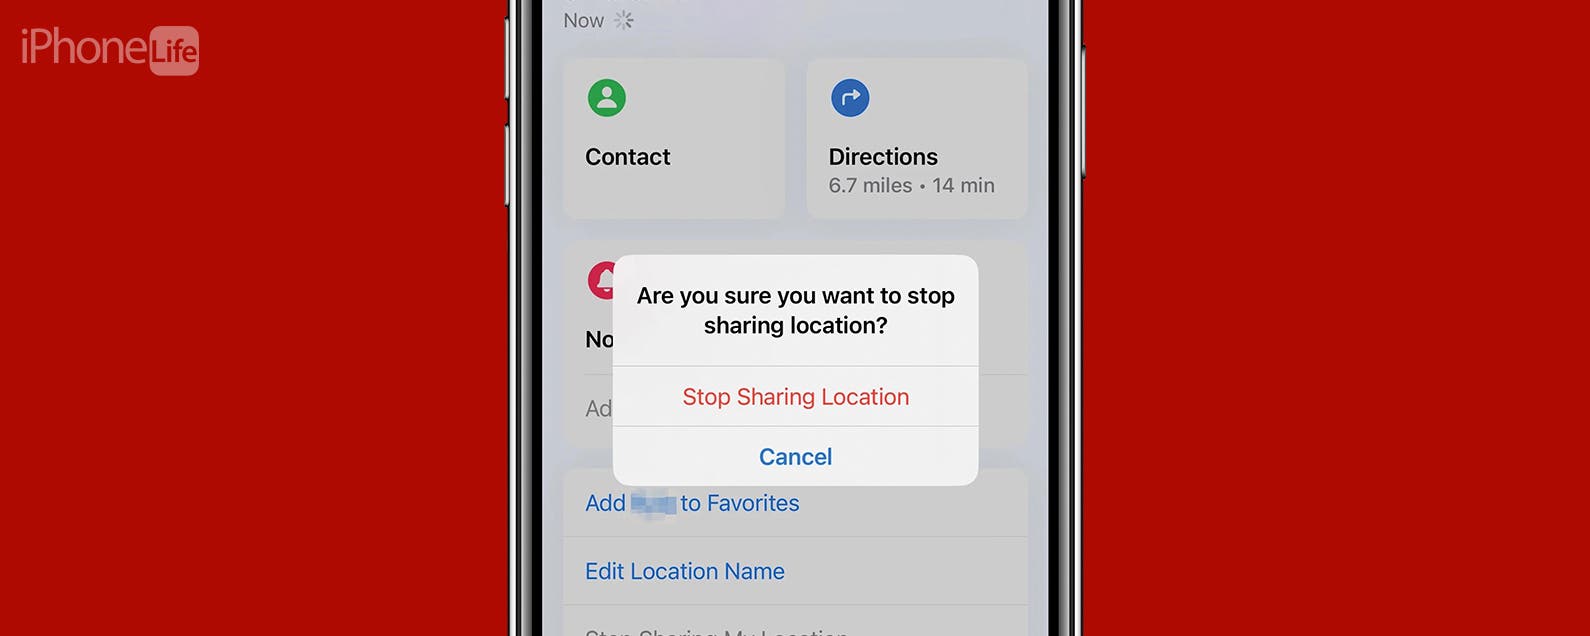 How to Stop Sharing Location on iPhone